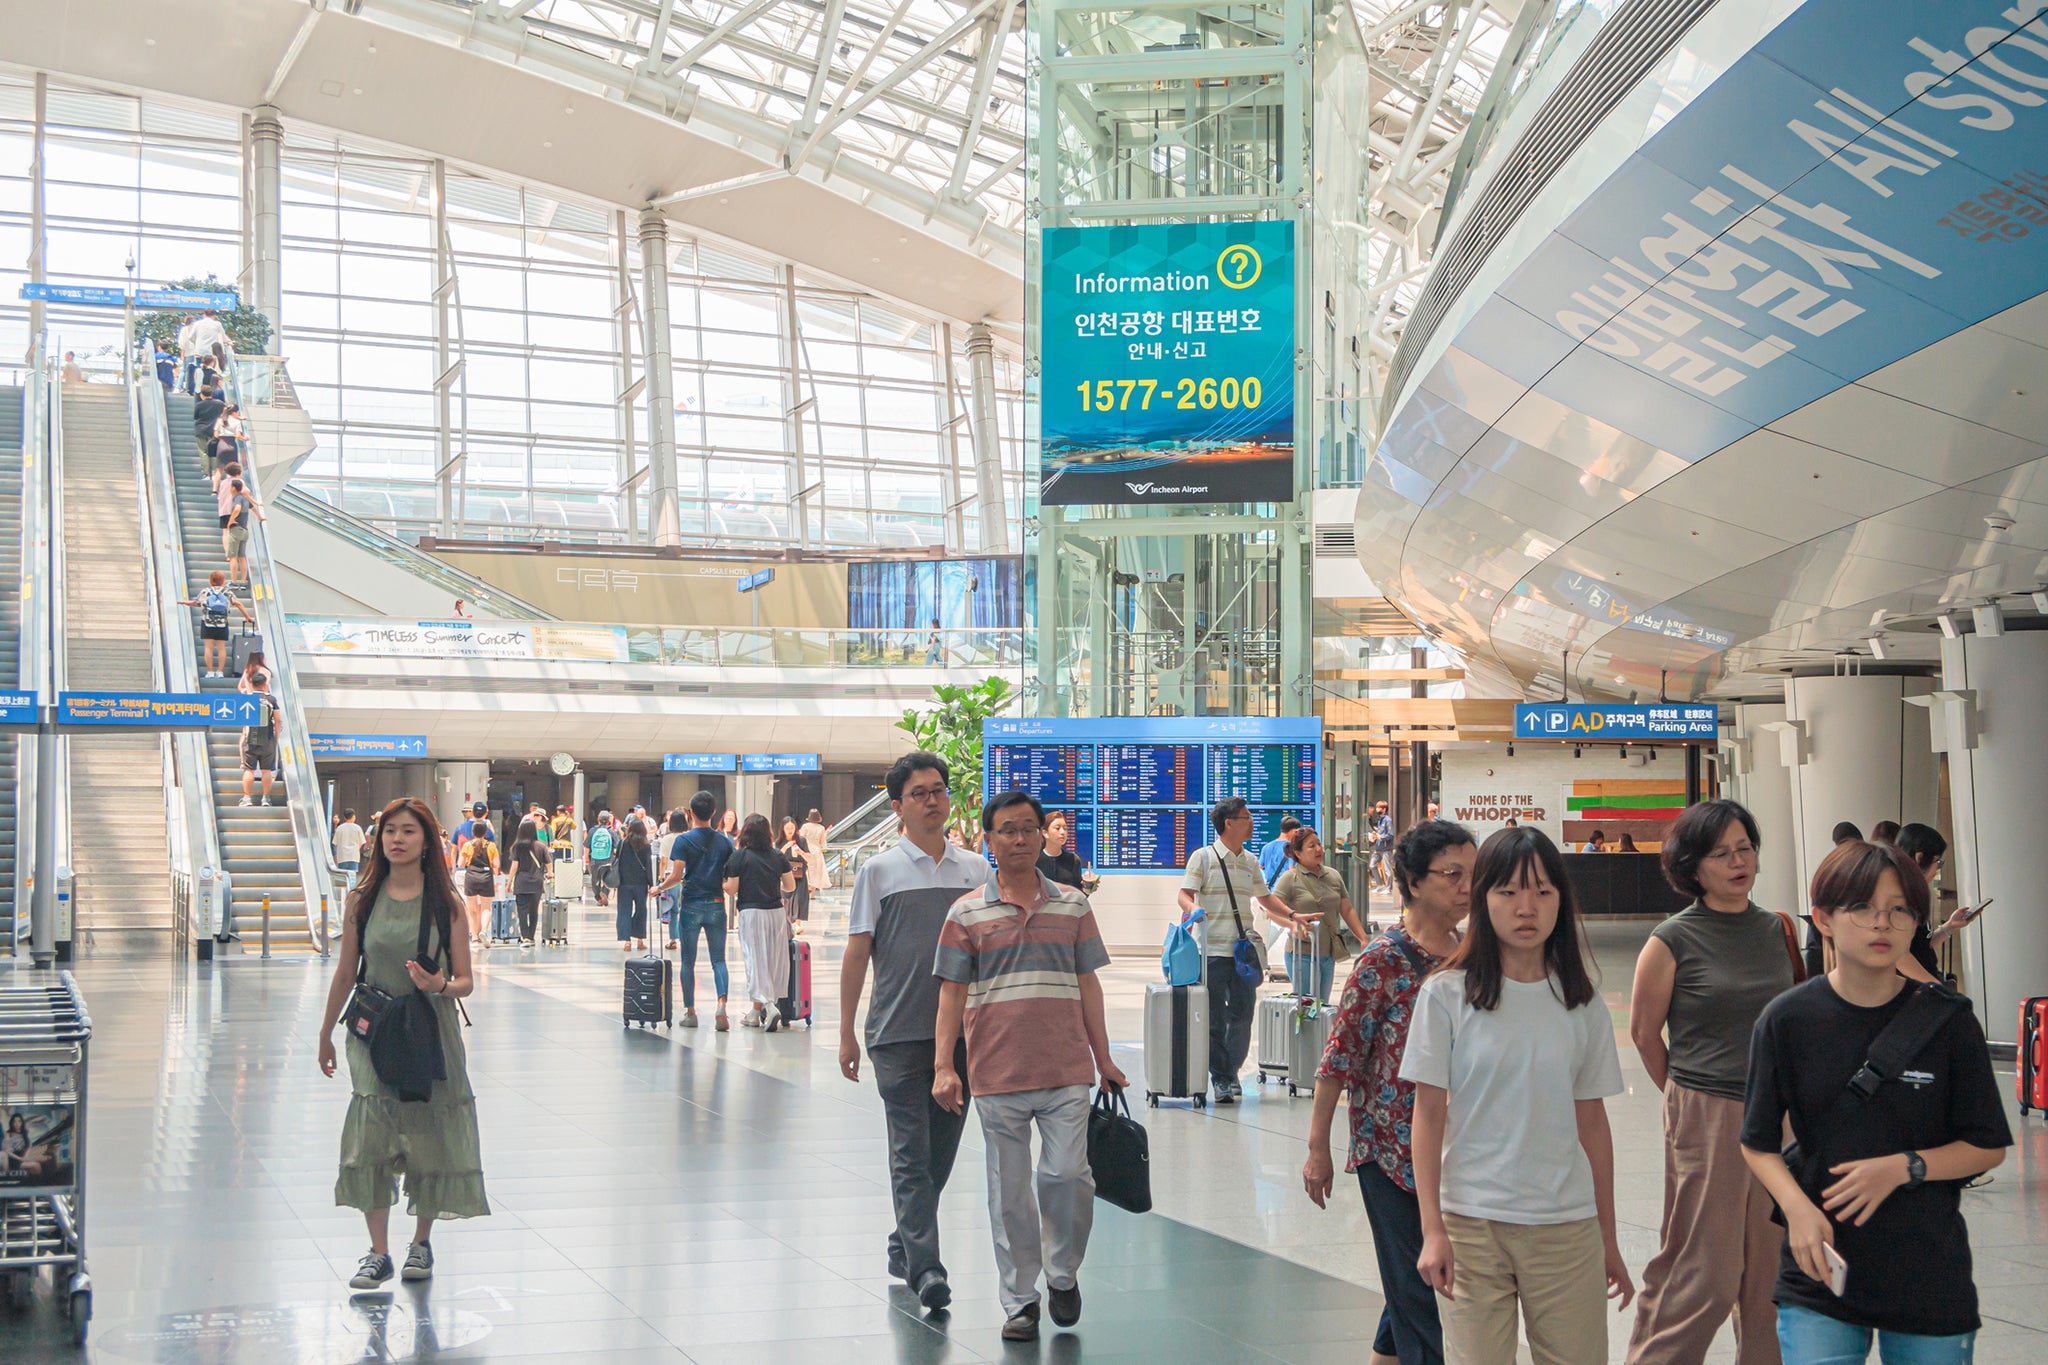 Incheon?airport is a model of how to present an open and user-friendly face to the world